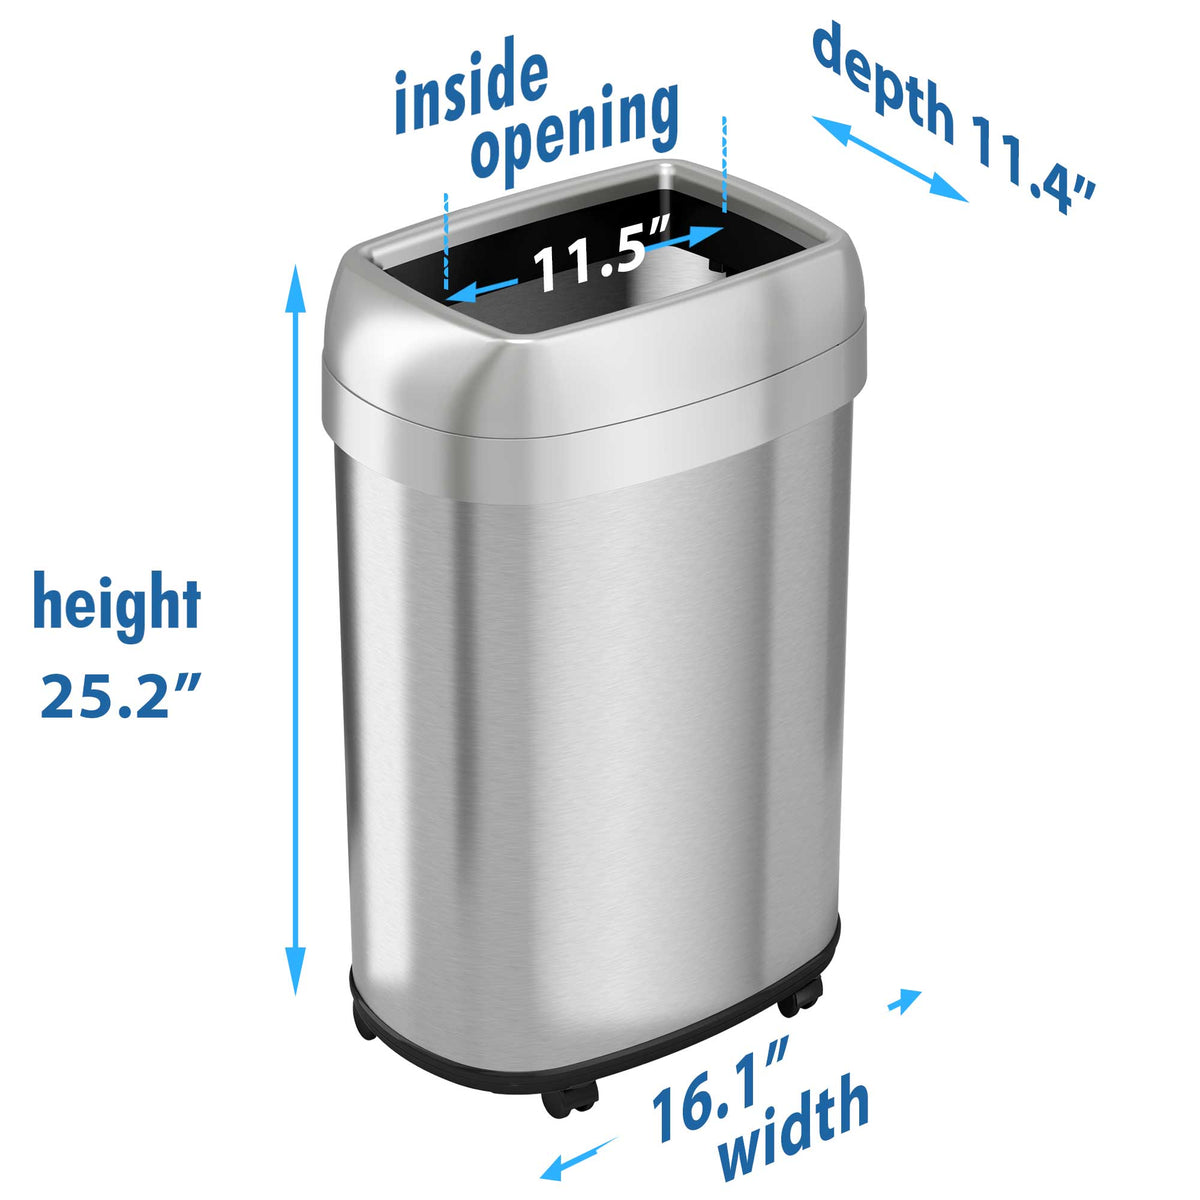 13 Gallon Elliptical Open Top Trash Can with Wheels dimensions